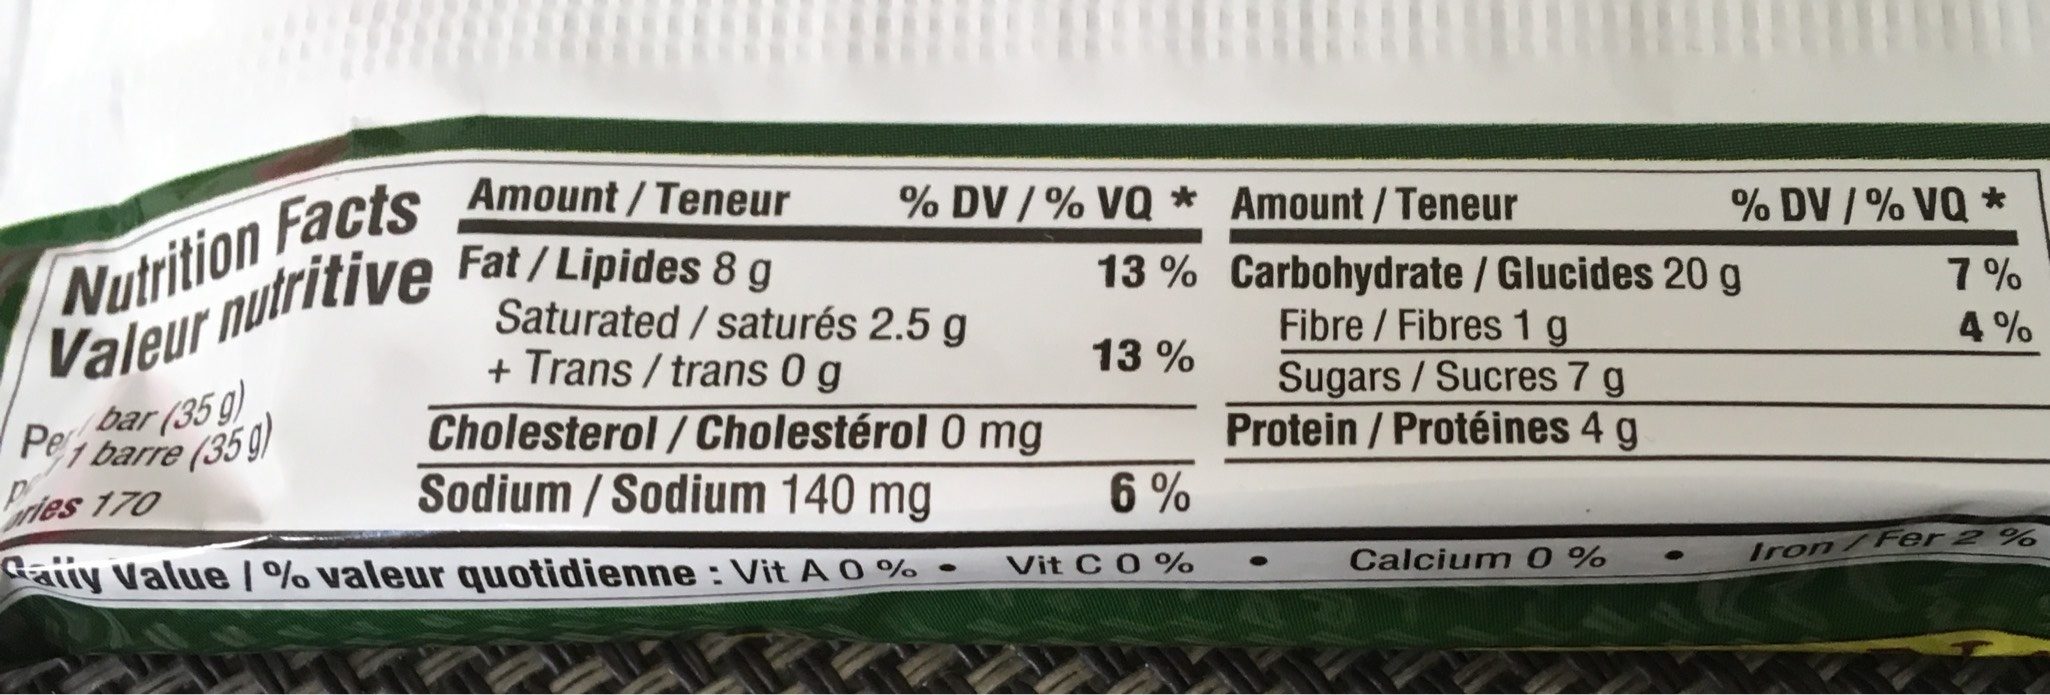 Nature Valley Sweet And Salty Peanut Chewy Nut Bar - Nutrition facts - fr